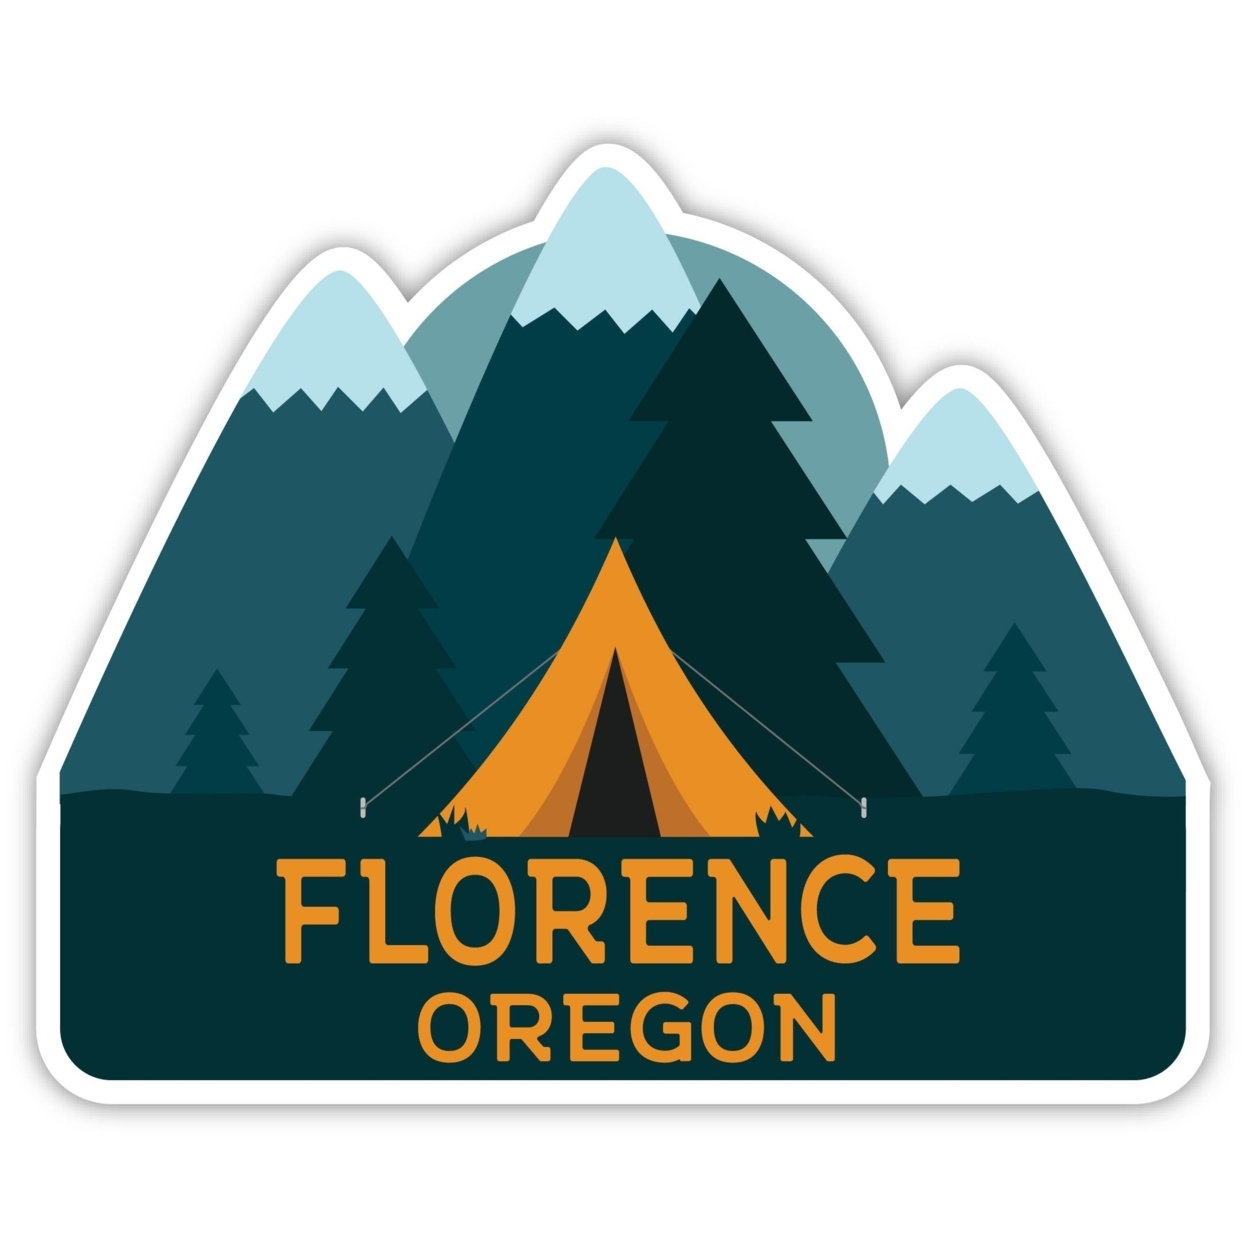 Florence Oregon Souvenir Decorative Stickers (Choose Theme And Size) - 4-Pack, 4-Inch, Adventures Awaits